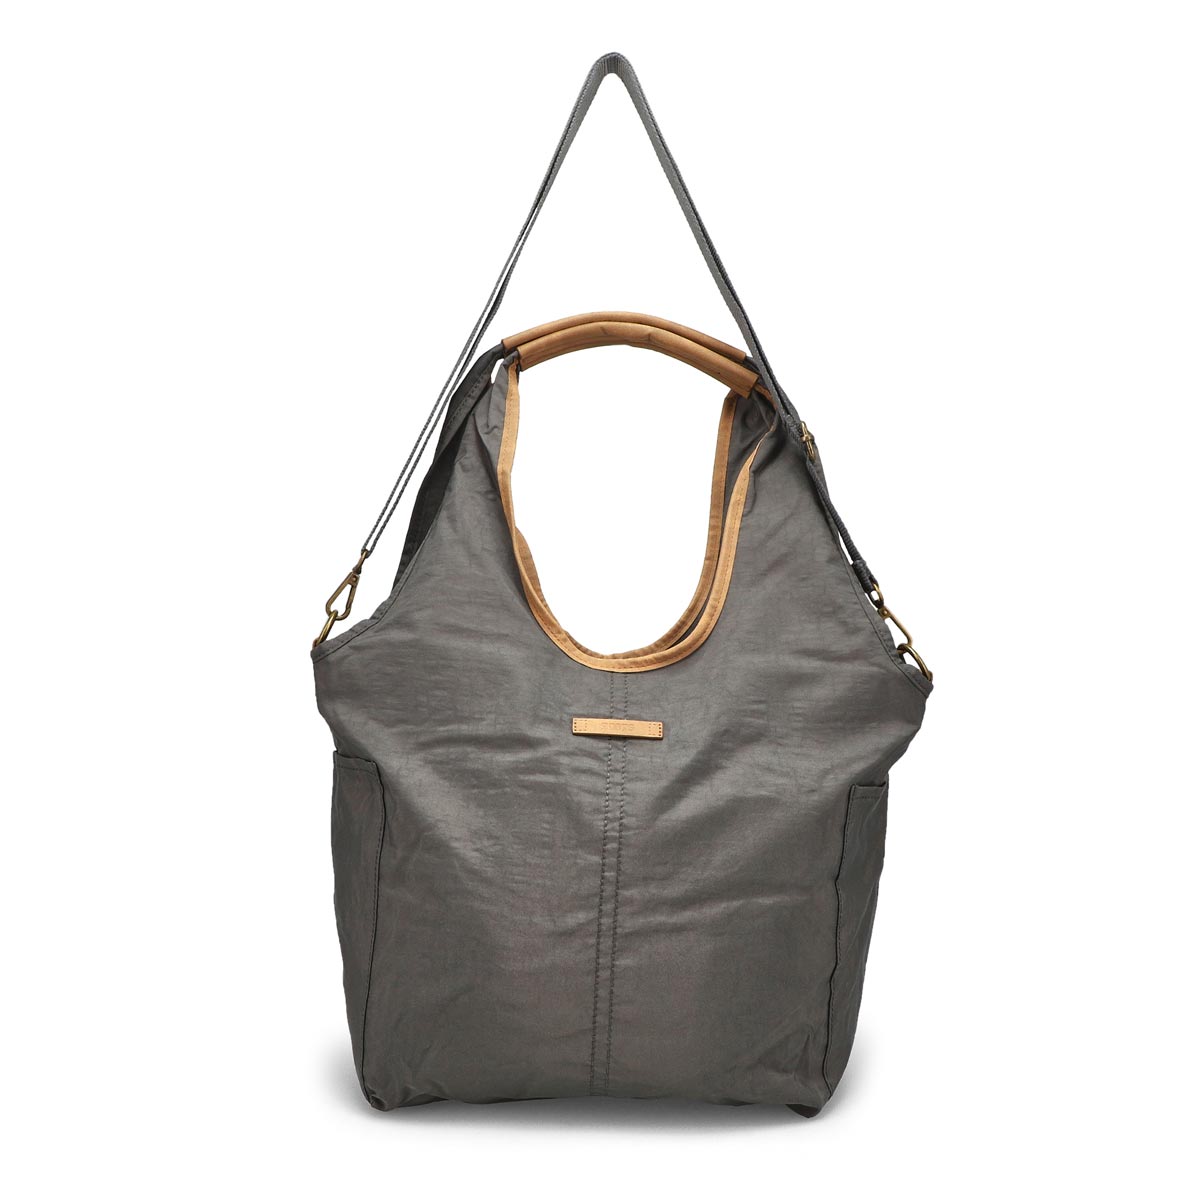 Sac besace R5892 CAMI HOBO, anthracite, femmes